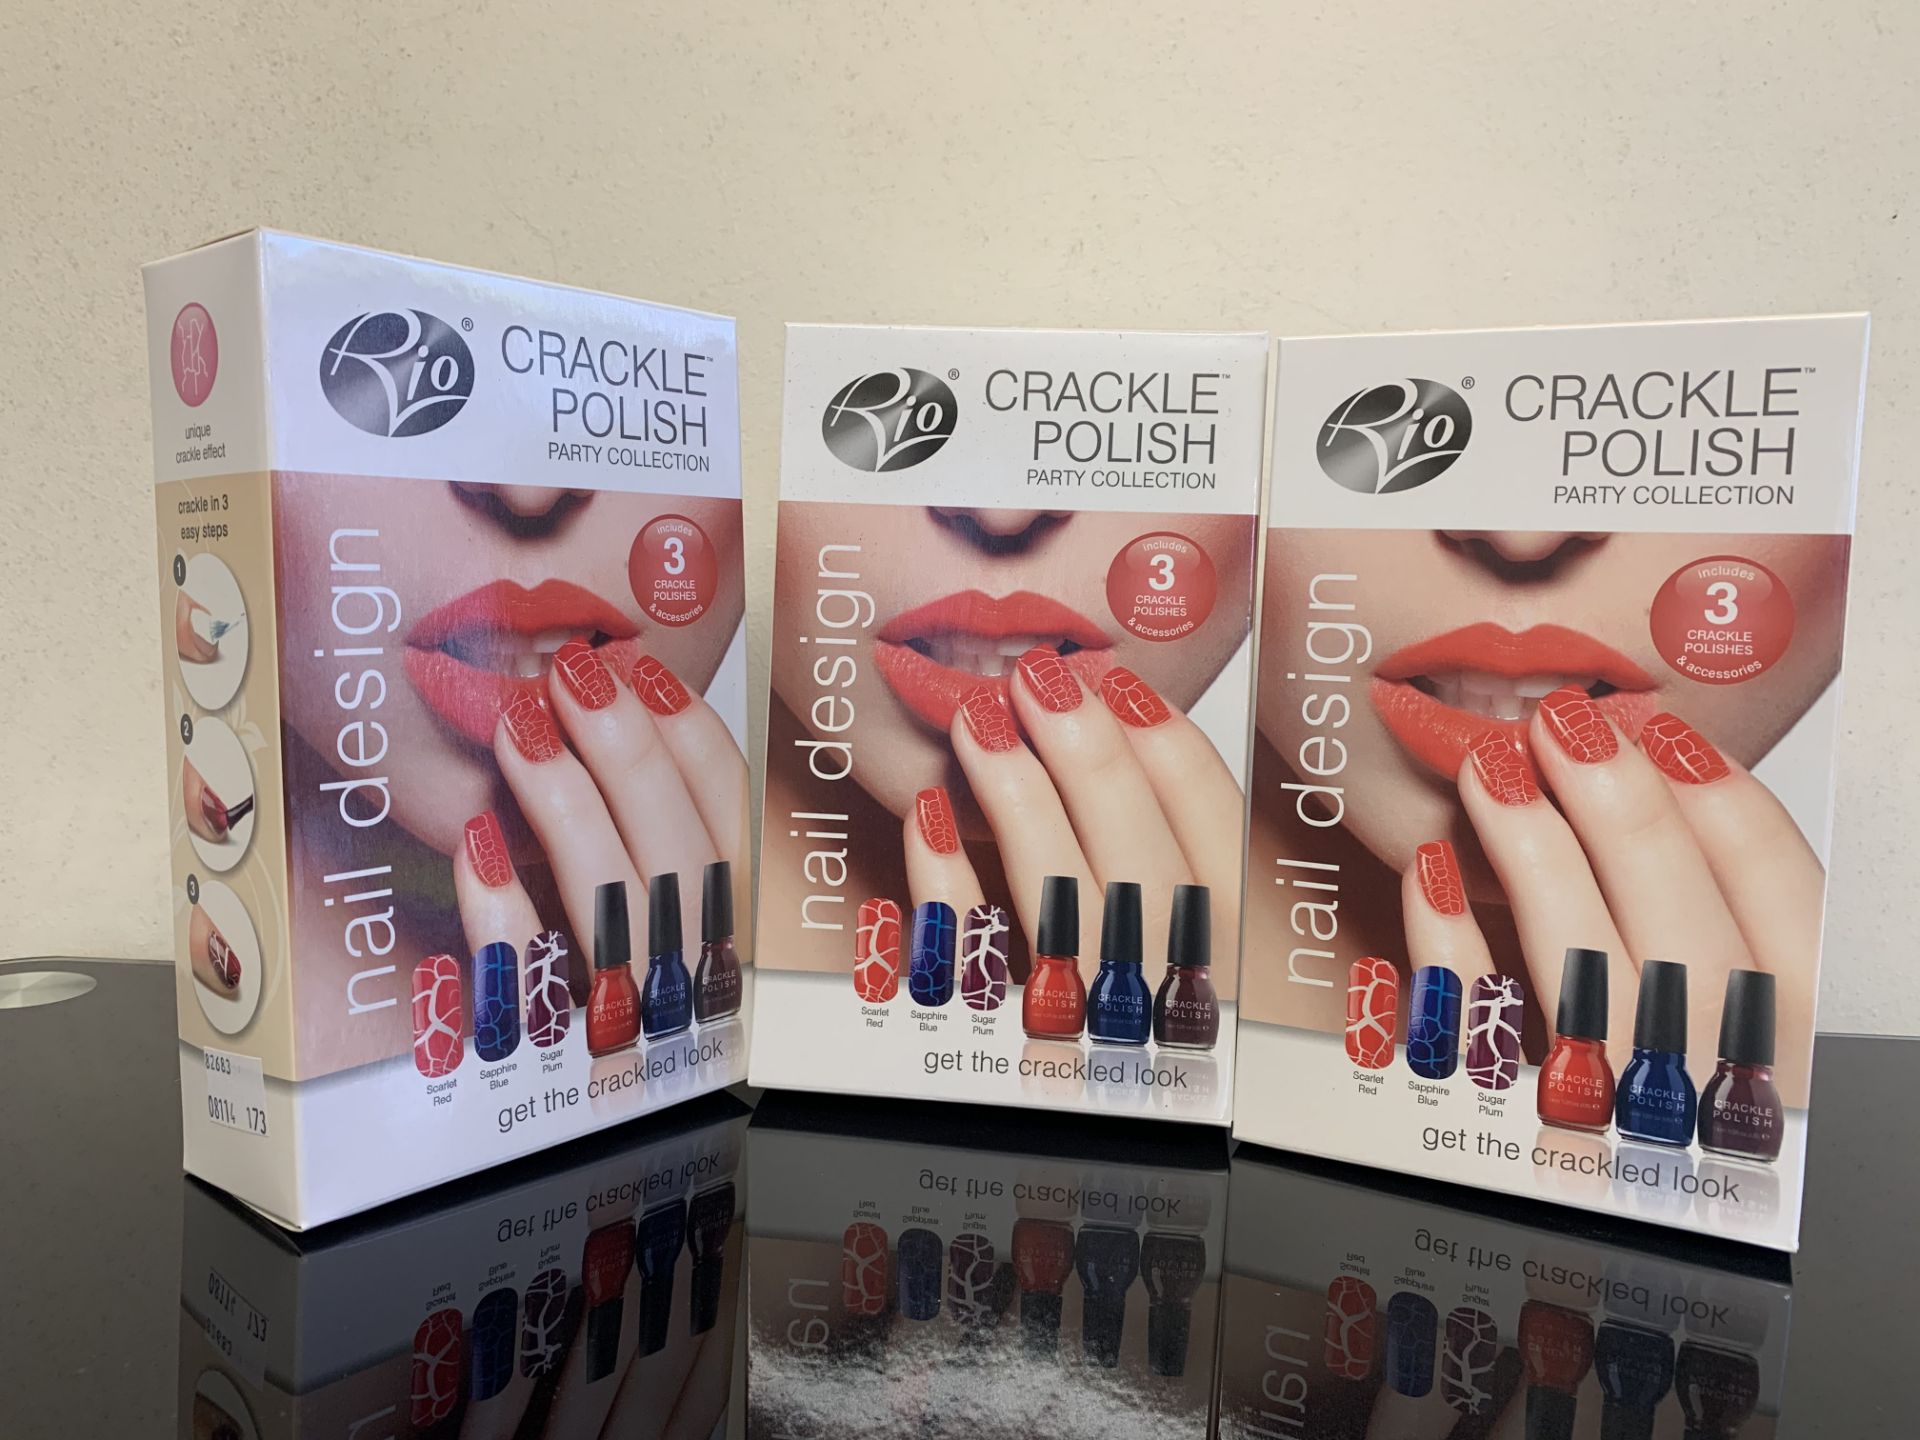 15 X RIO CRACKLE POLISH NAIL DESIGN PARTY COLLECTION SETS, EACH SET CONTAINS 3 CRACKLE POLISHES